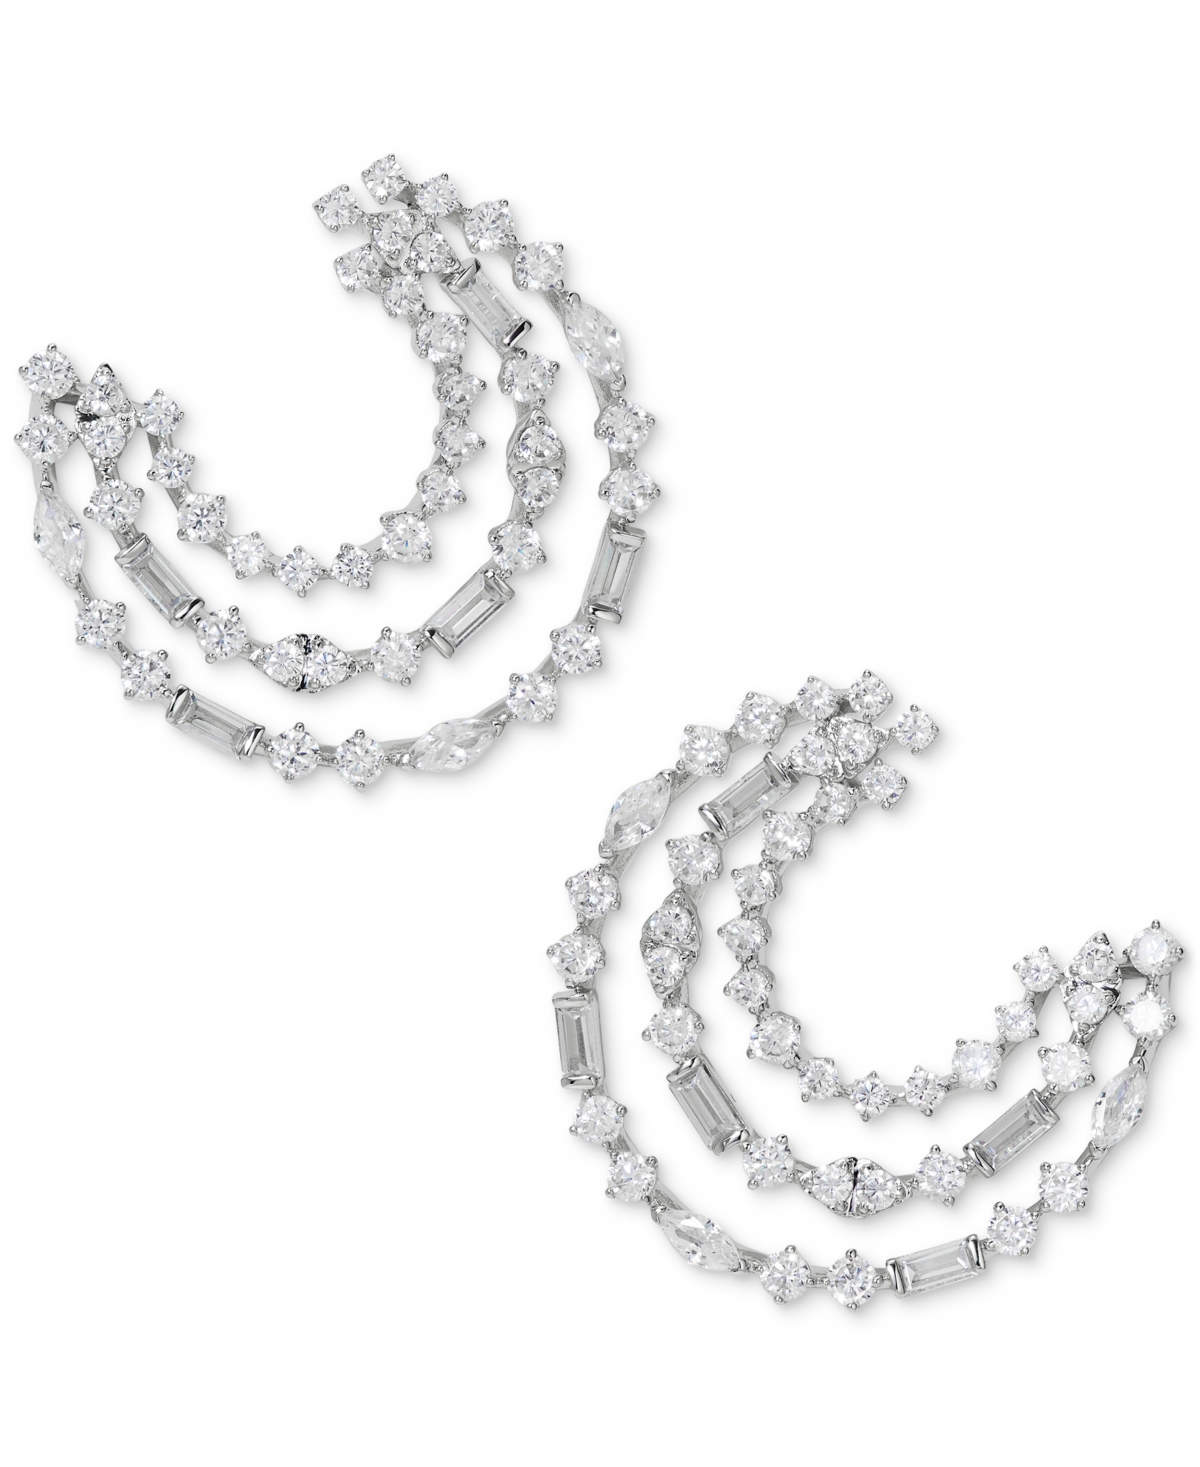 Silver-Tone Mixed Cubic Zirconia Front-Facing Hoop Earrings, Created for Macy's - Rhodium